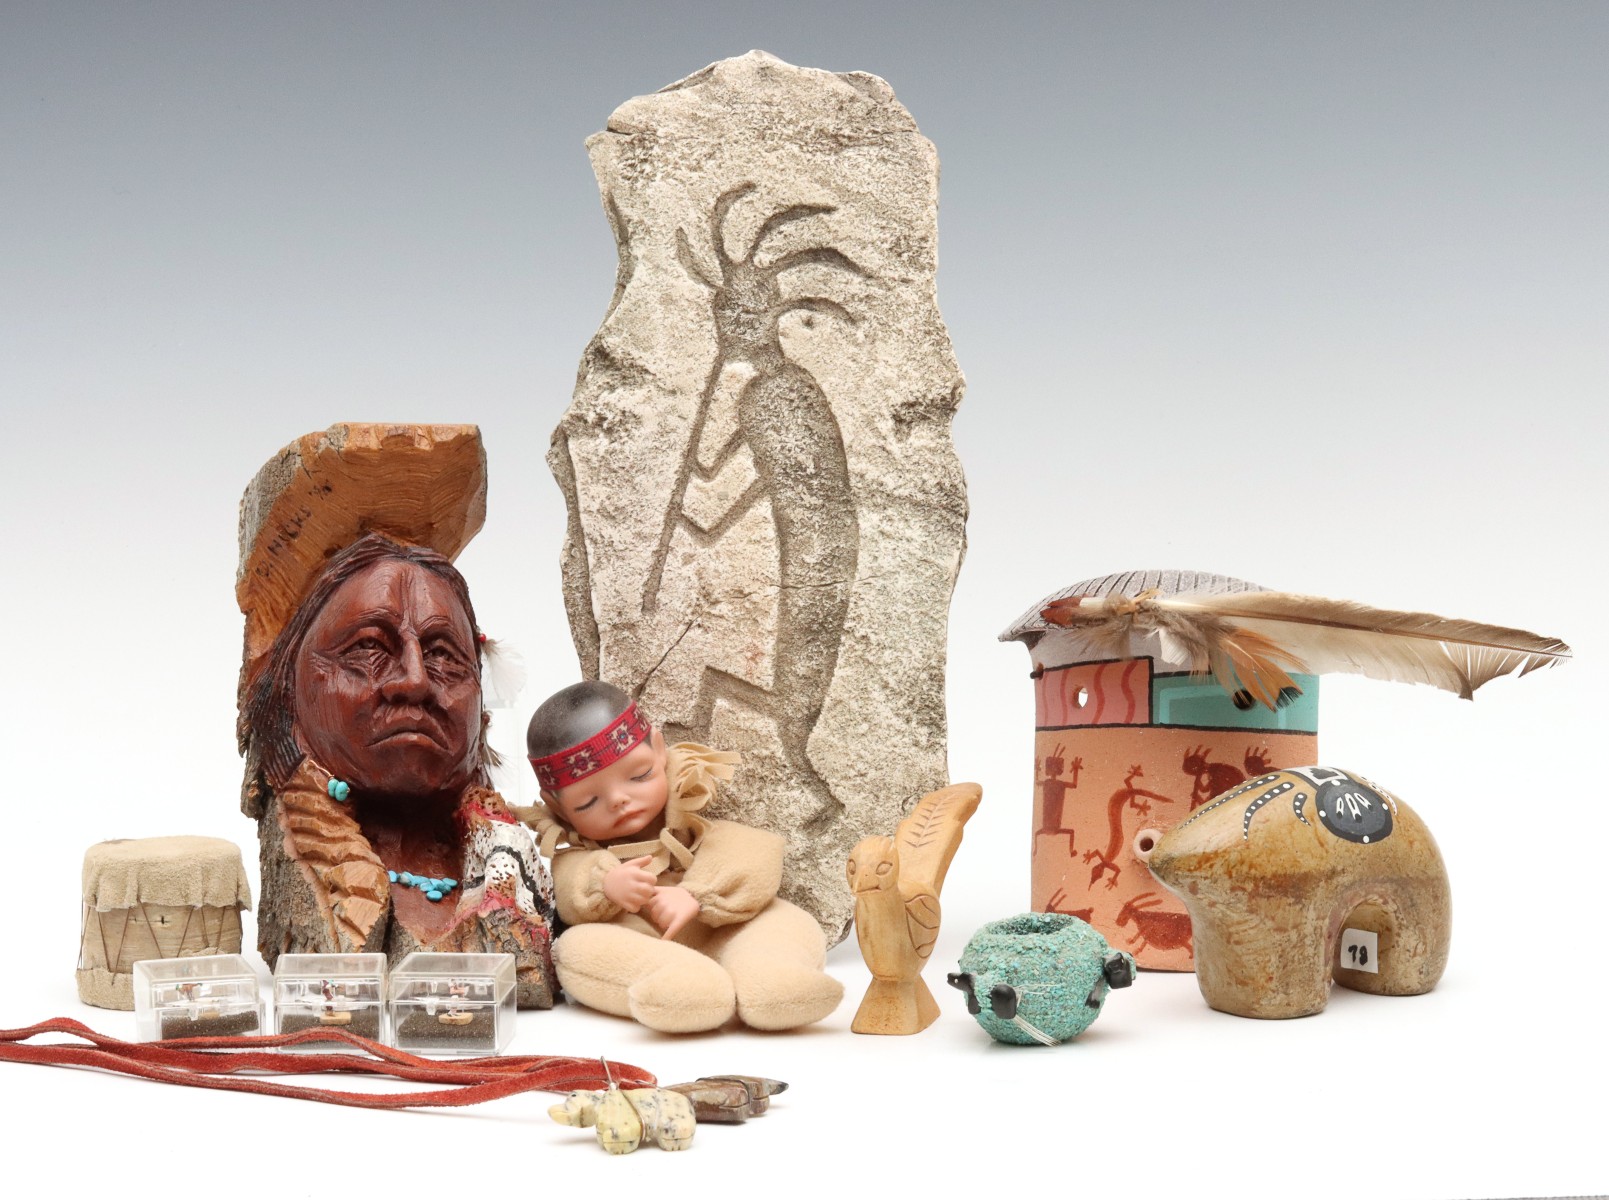 NATIVE AMERICAN INSPIRED CRAFTS AND CARVINGS